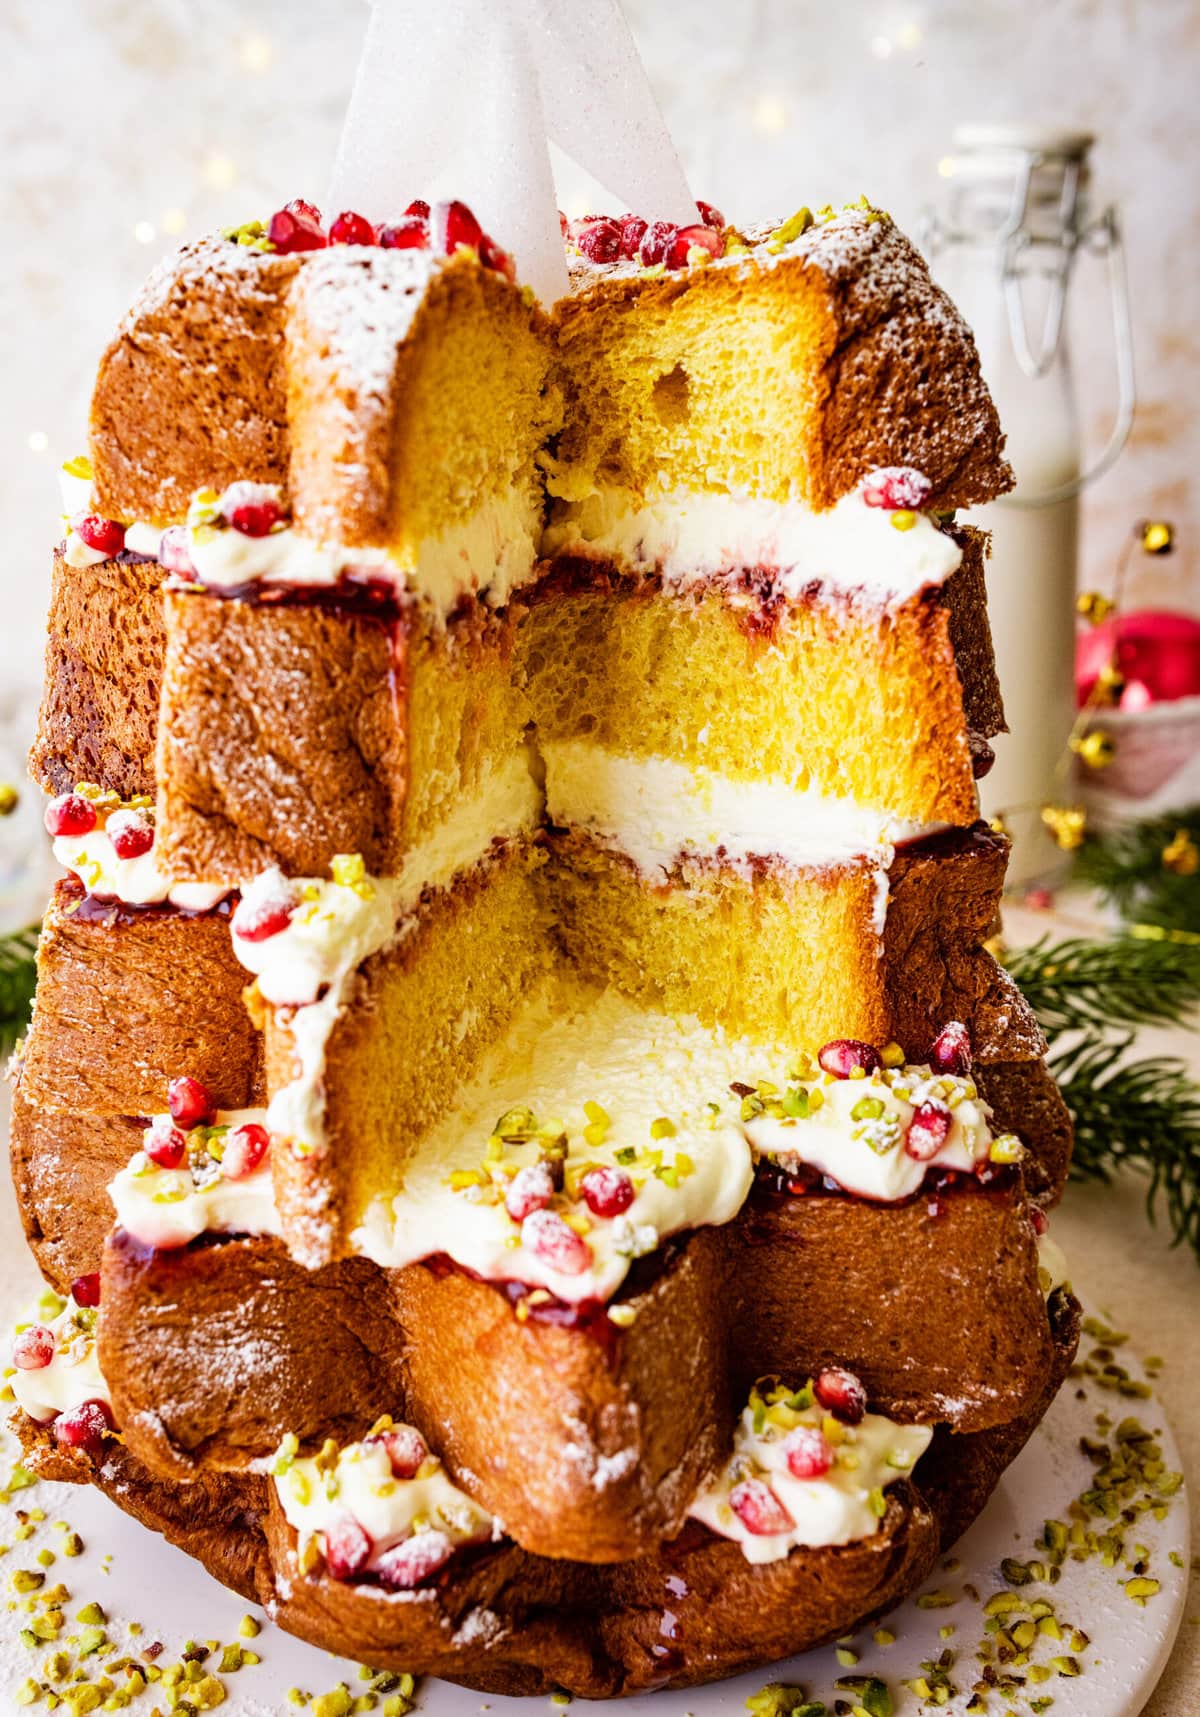 Pandoro Christmas tree cake with star on top and Christmas mood all around with lights and tiny gold bells. Cut a slice and see the middle layers of the cake.